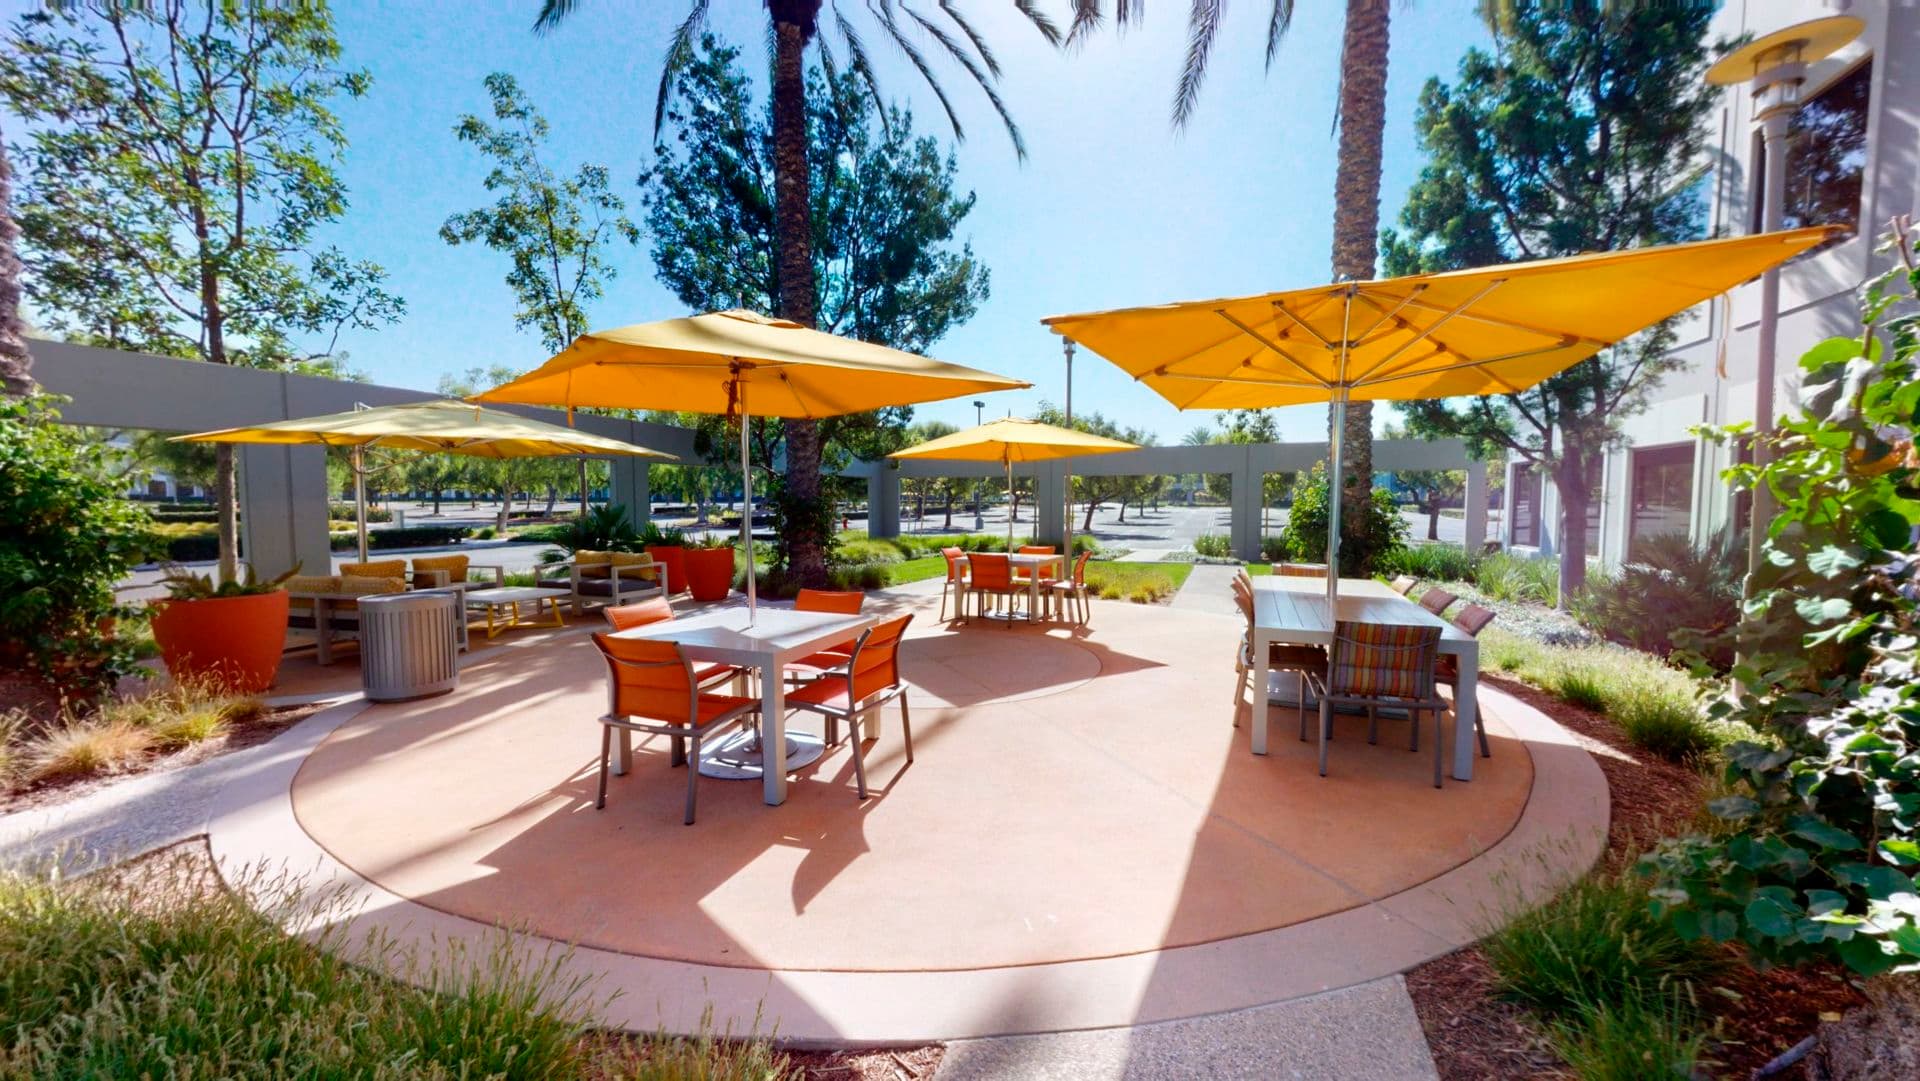 Exterior photography of Outdoor Workspace at 440 Exchange at Market Place Center, Irvine CA.